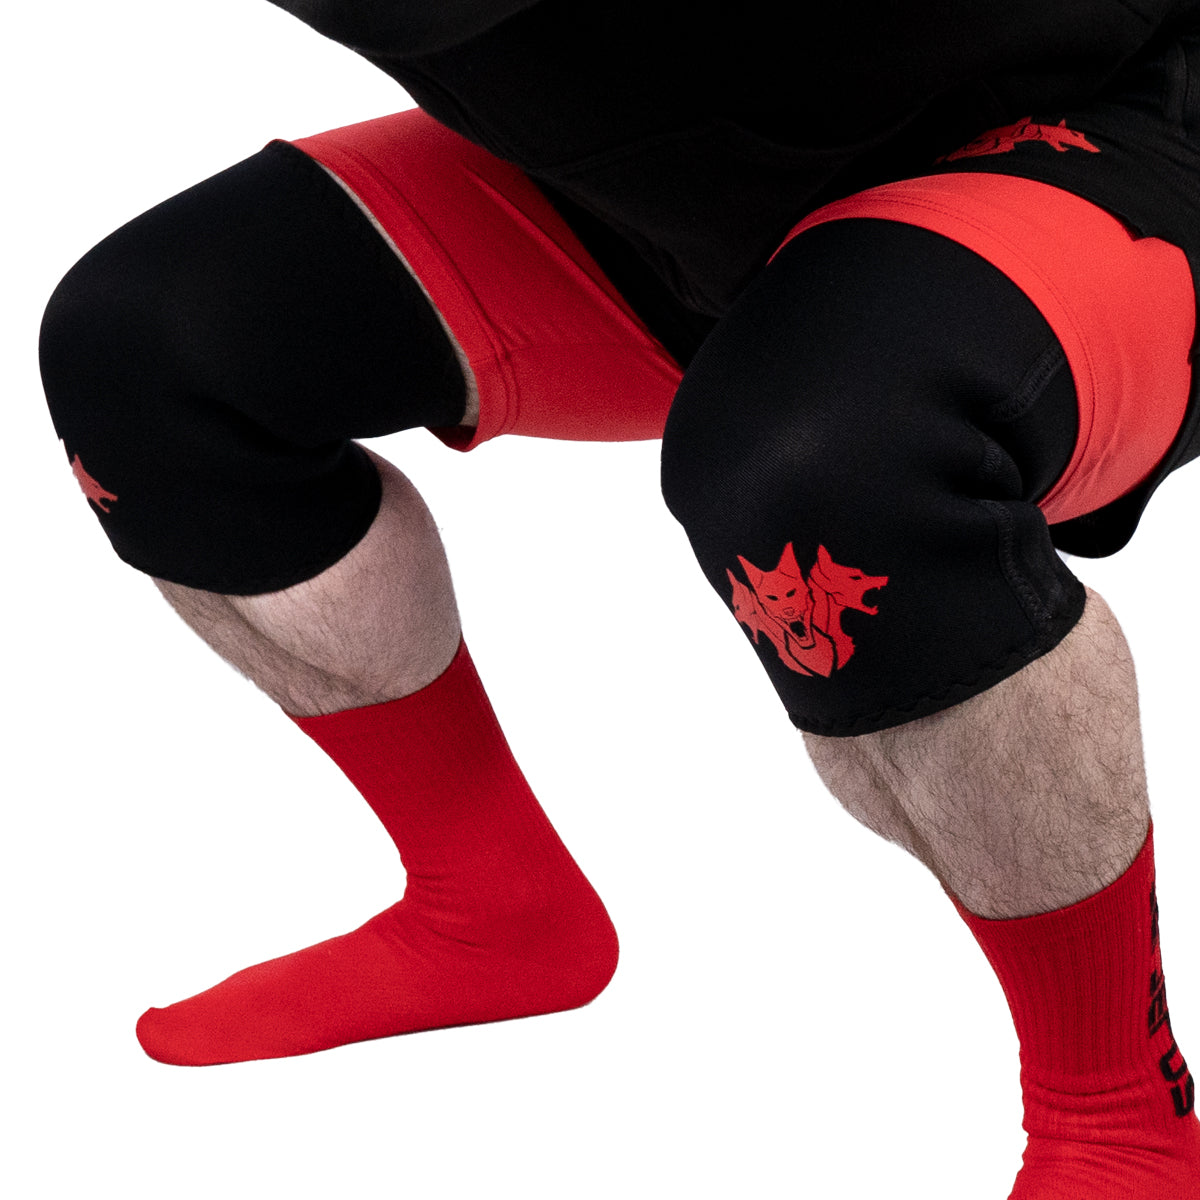 7mm COMPETITION Knee Sleeves – CERBERUS Strength